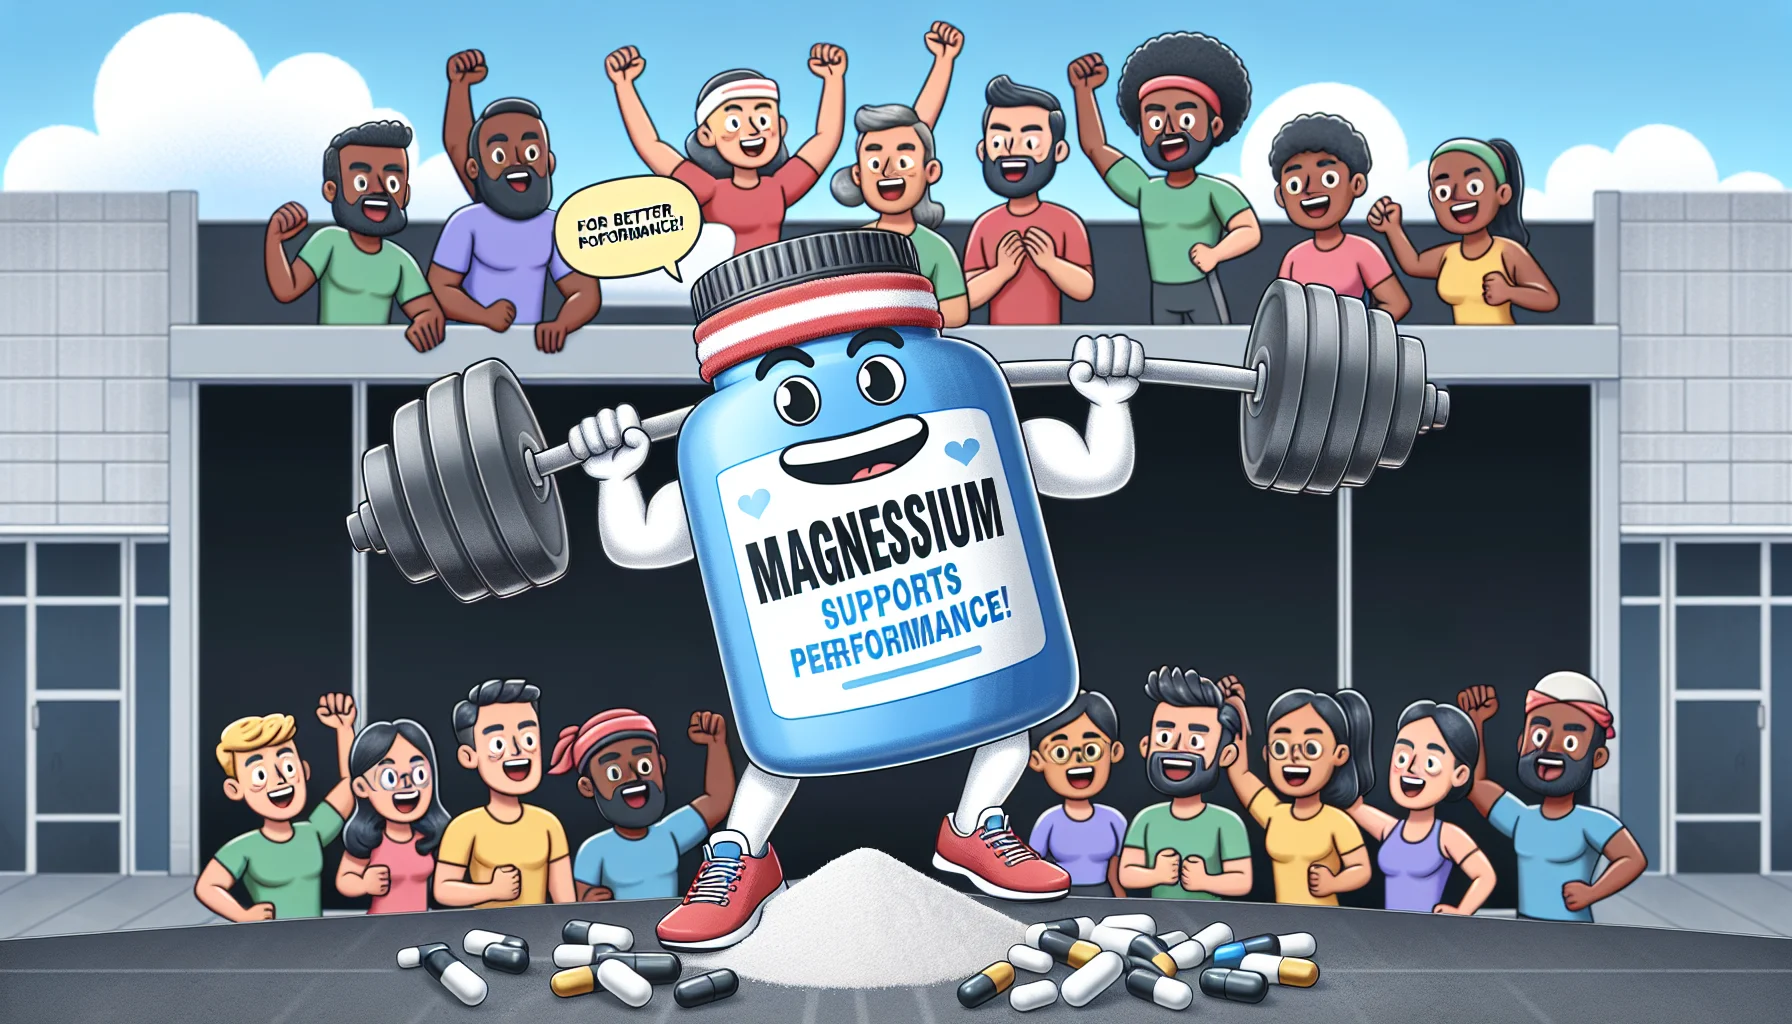 Produce a vivid and humorous image of a scene involving a bottle of magnesium supplements from a generic health store. The bottle is anthropomorphized, wearing a sweatband and running shoes, and successfully lifting weights at a gym. It is surrounded by a diverse group of cheering individuals of mixed genders and descents, including Caucasian, Hispanic, Black, Middle-Eastern, and South Asian. A speech bubble coming out of the animated supplement bottle reads 'For better sports performance!' This image aims to humorously emphasize using magnesium supplements for enhancing sports activities.